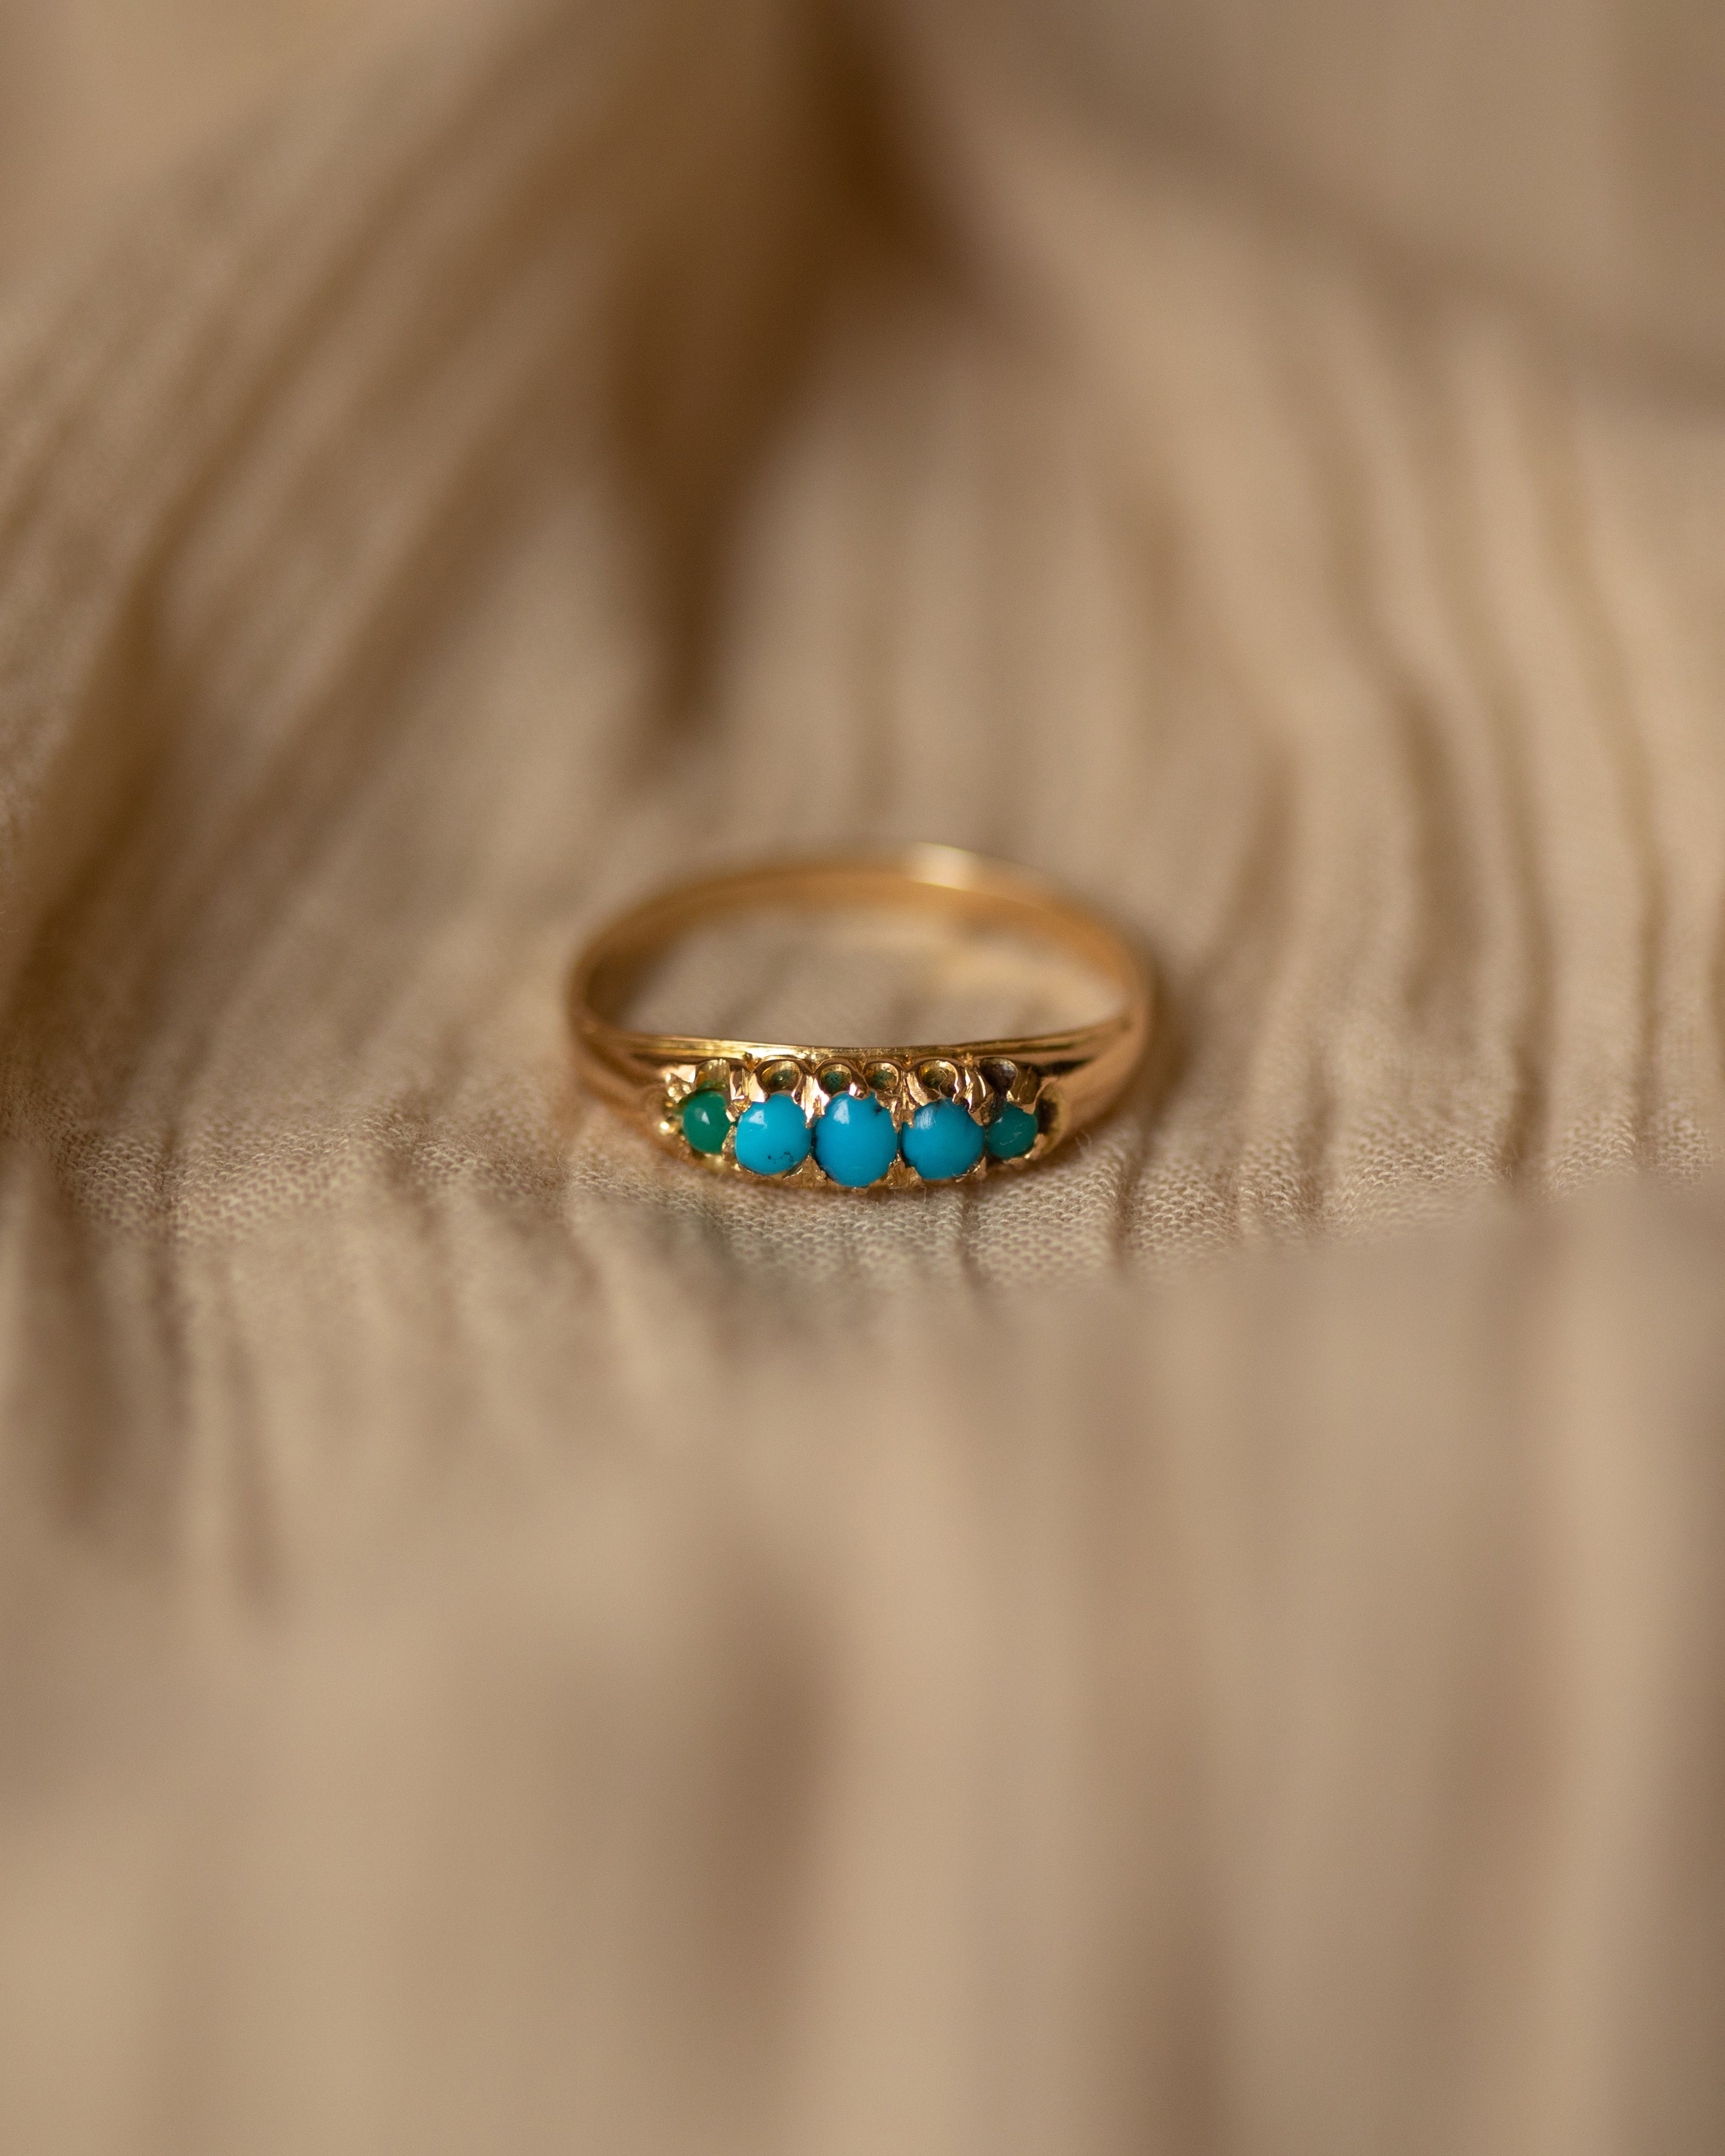 June Antique 9ct Gold Turquoise Five Stone Ring